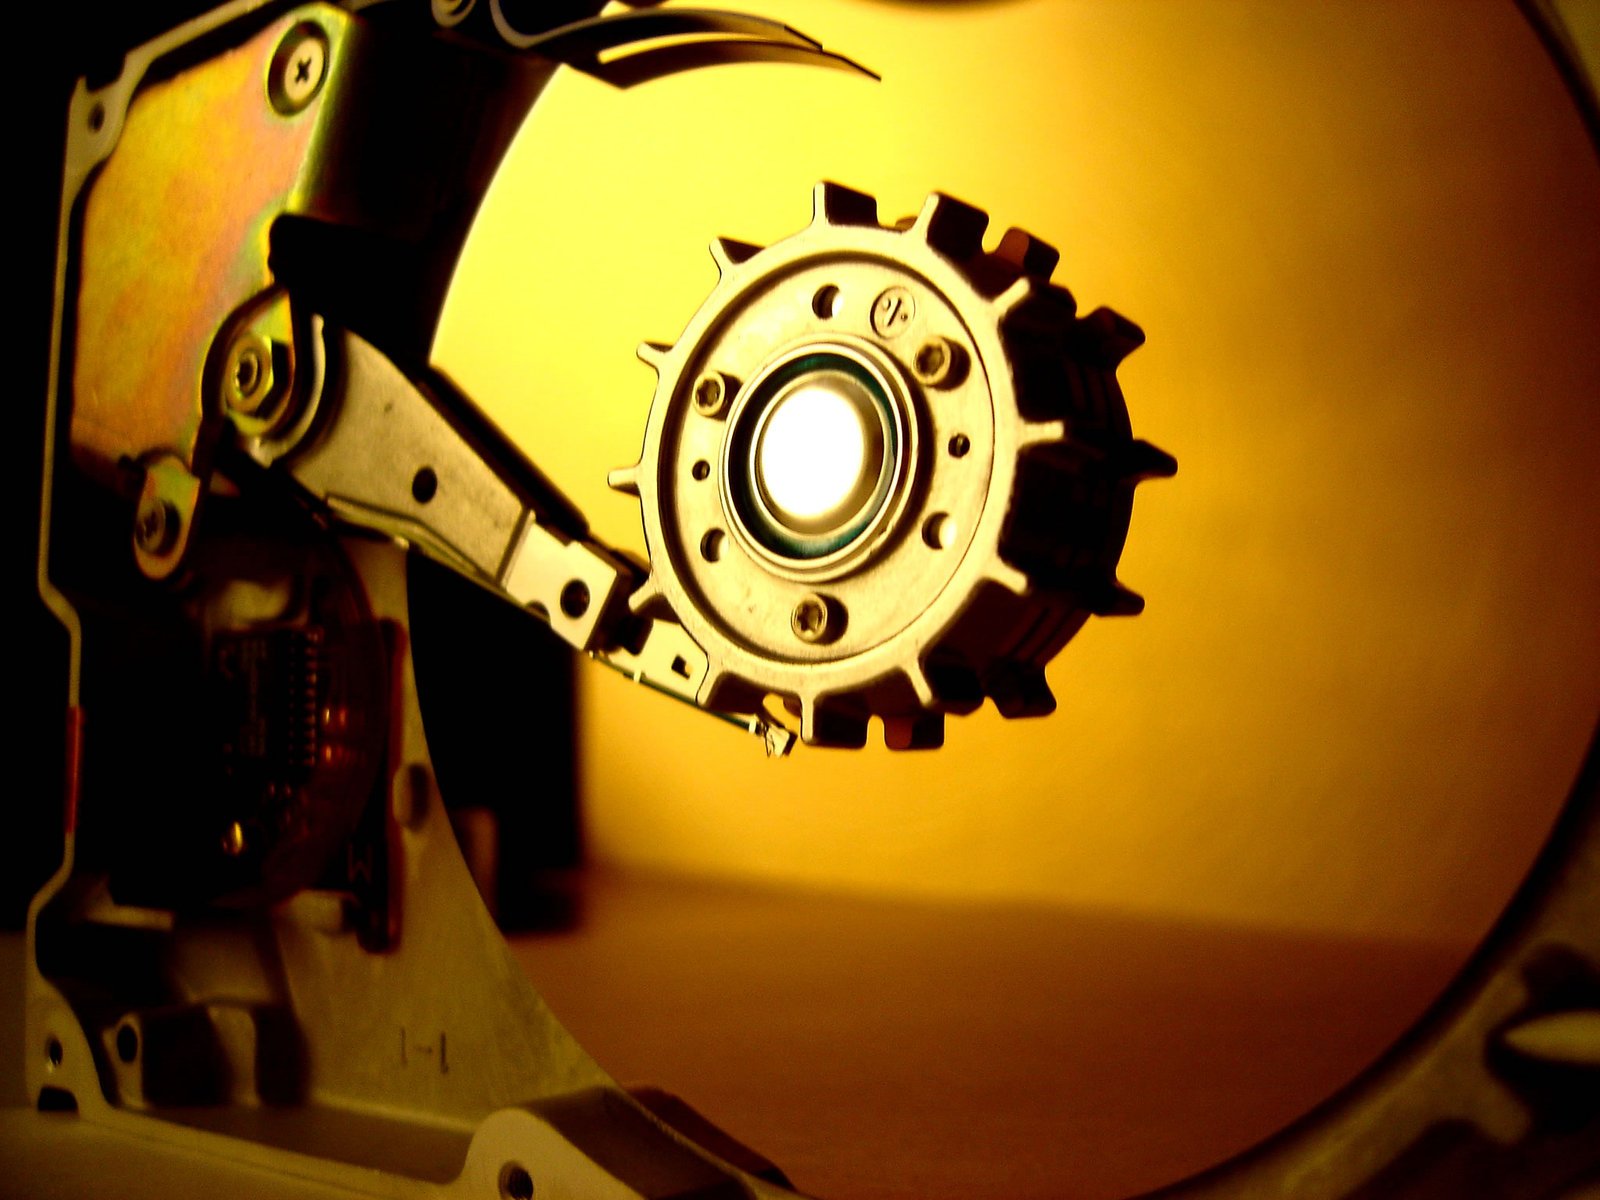 an image of a hard drive attached to a computer